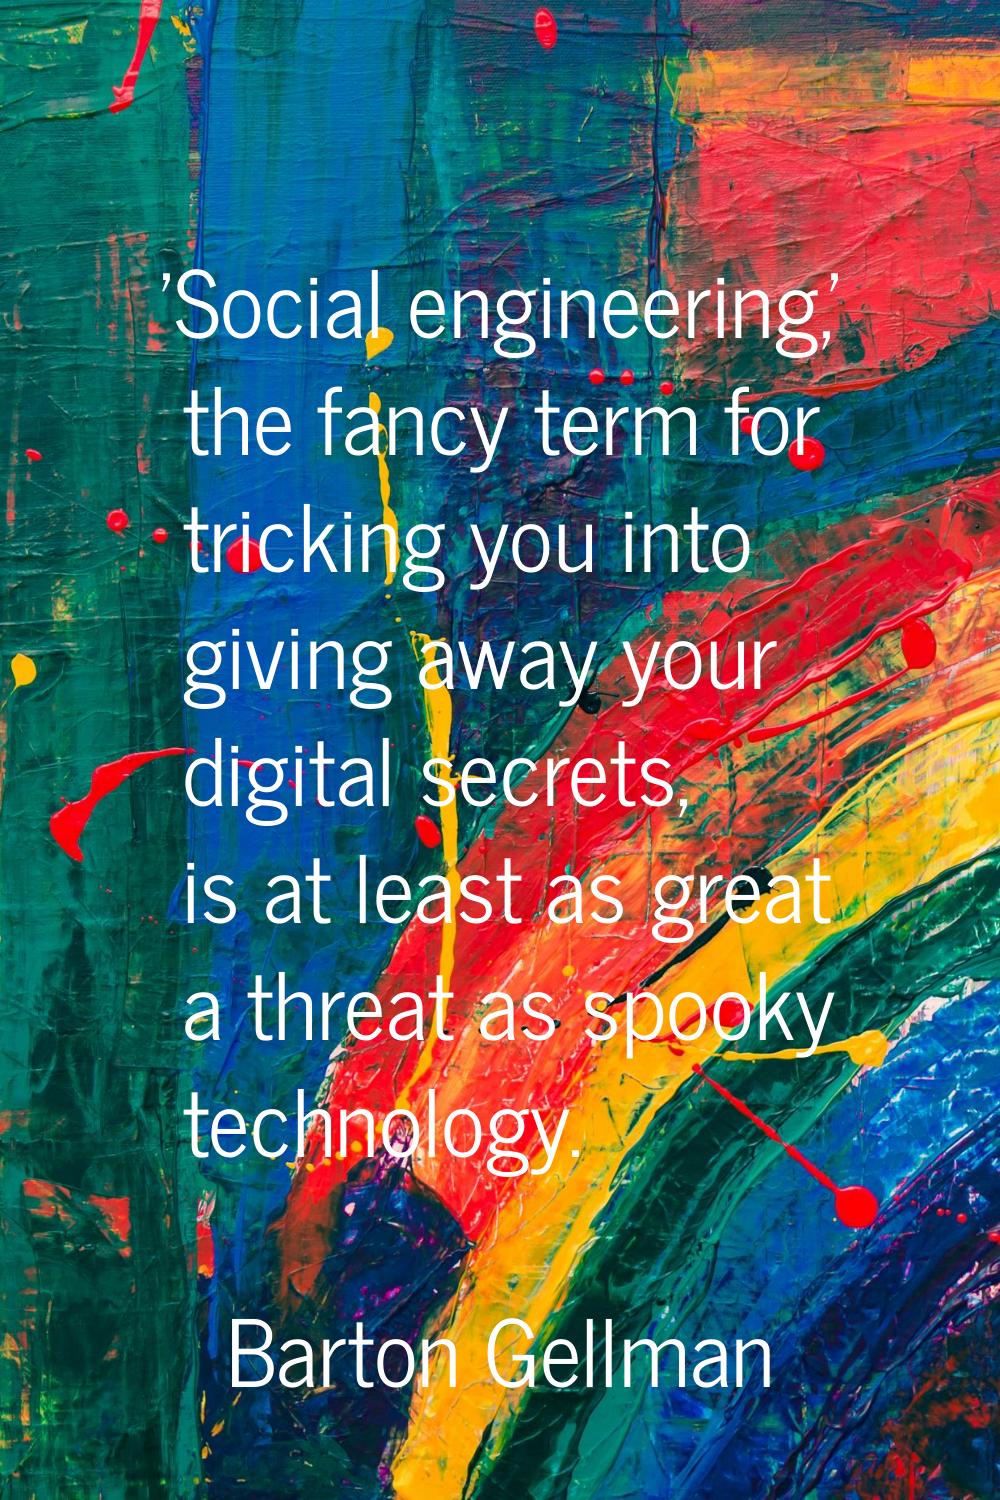 'Social engineering,' the fancy term for tricking you into giving away your digital secrets, is at 